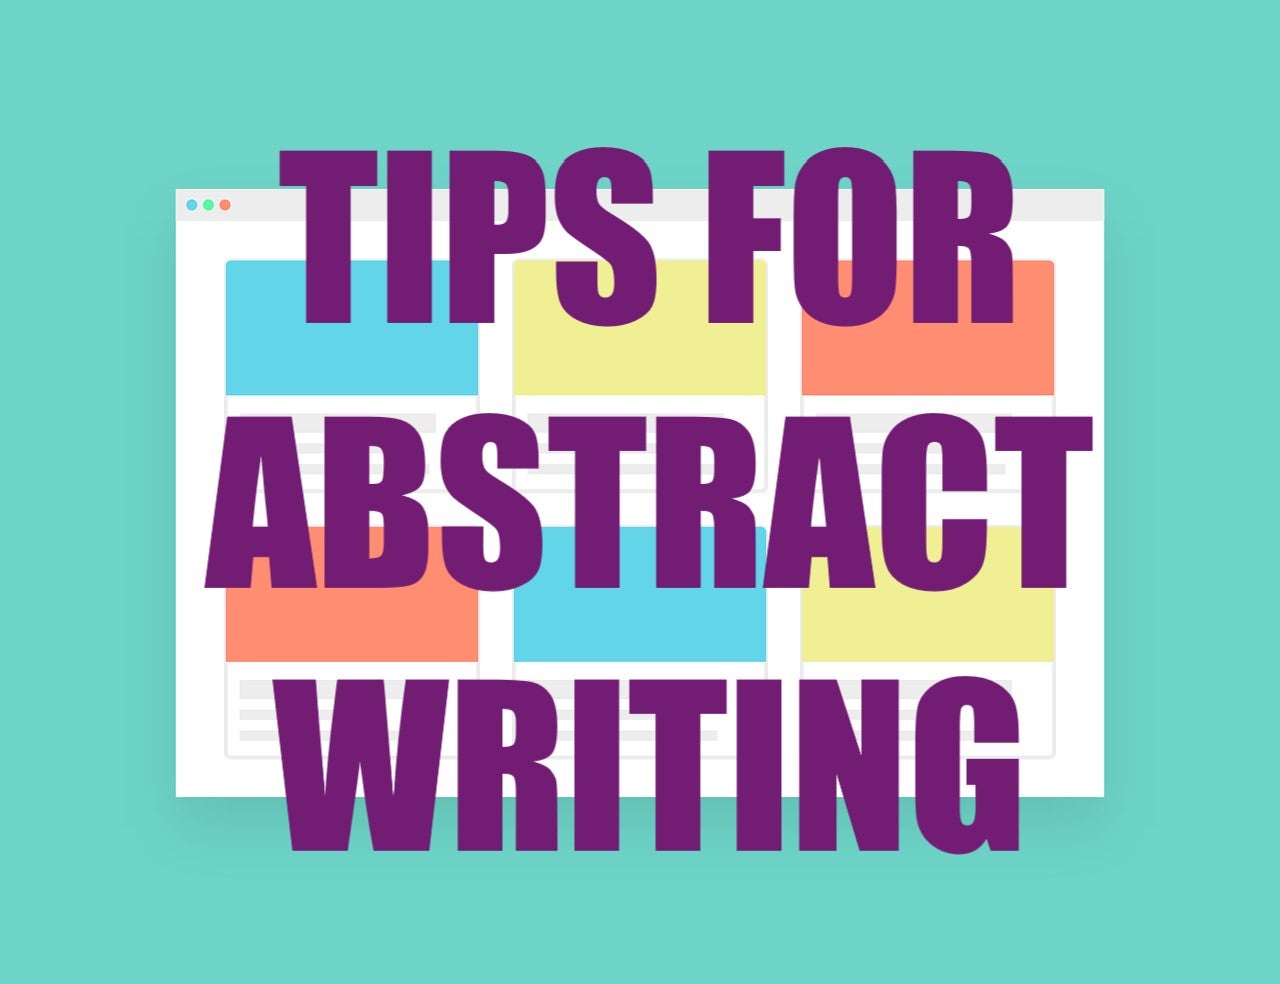 Purple block lettering reading Tips for Abstract Writing sits on top of a seafoam green background. A graphical version of a website with blue, yellow, and red squares representing article abstracts sits within the background.